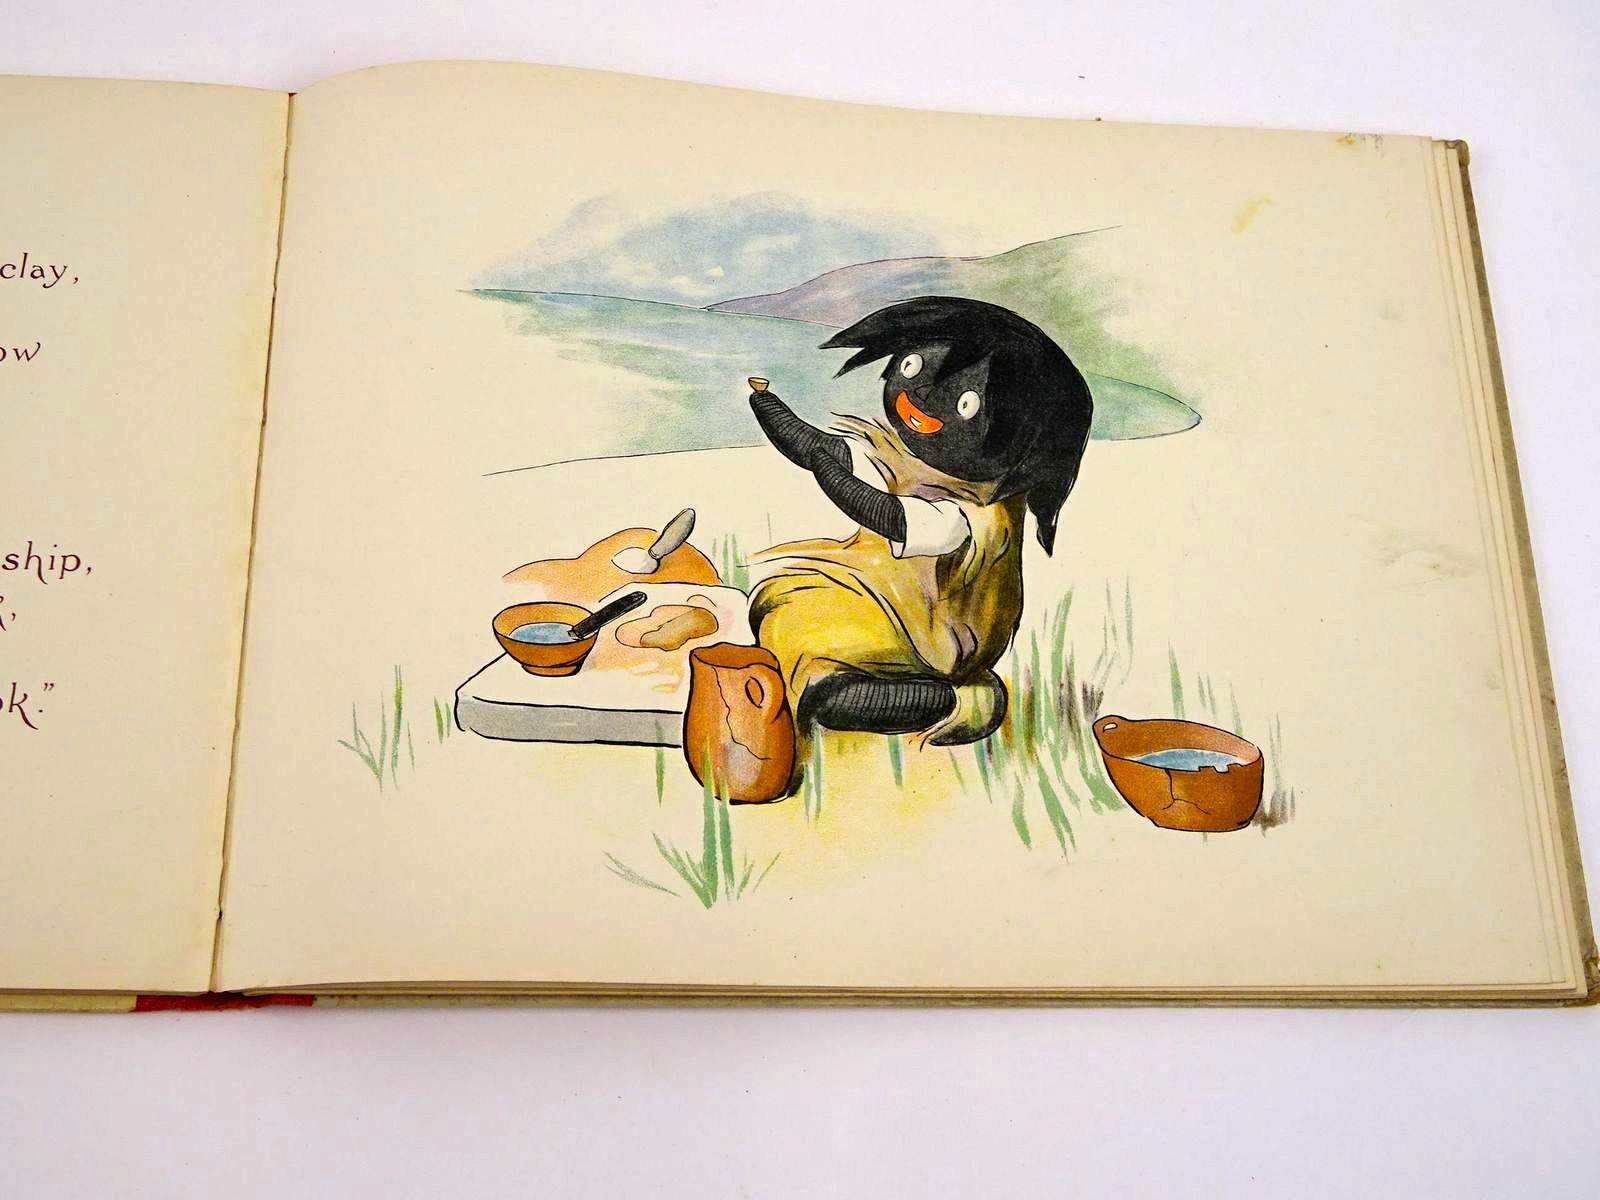 Photo of THE GOLLIWOGG'S DESERT ISLAND written by Upton, Bertha illustrated by Upton, Florence published by Longmans, Green & Co. (STOCK CODE: 1318243)  for sale by Stella & Rose's Books